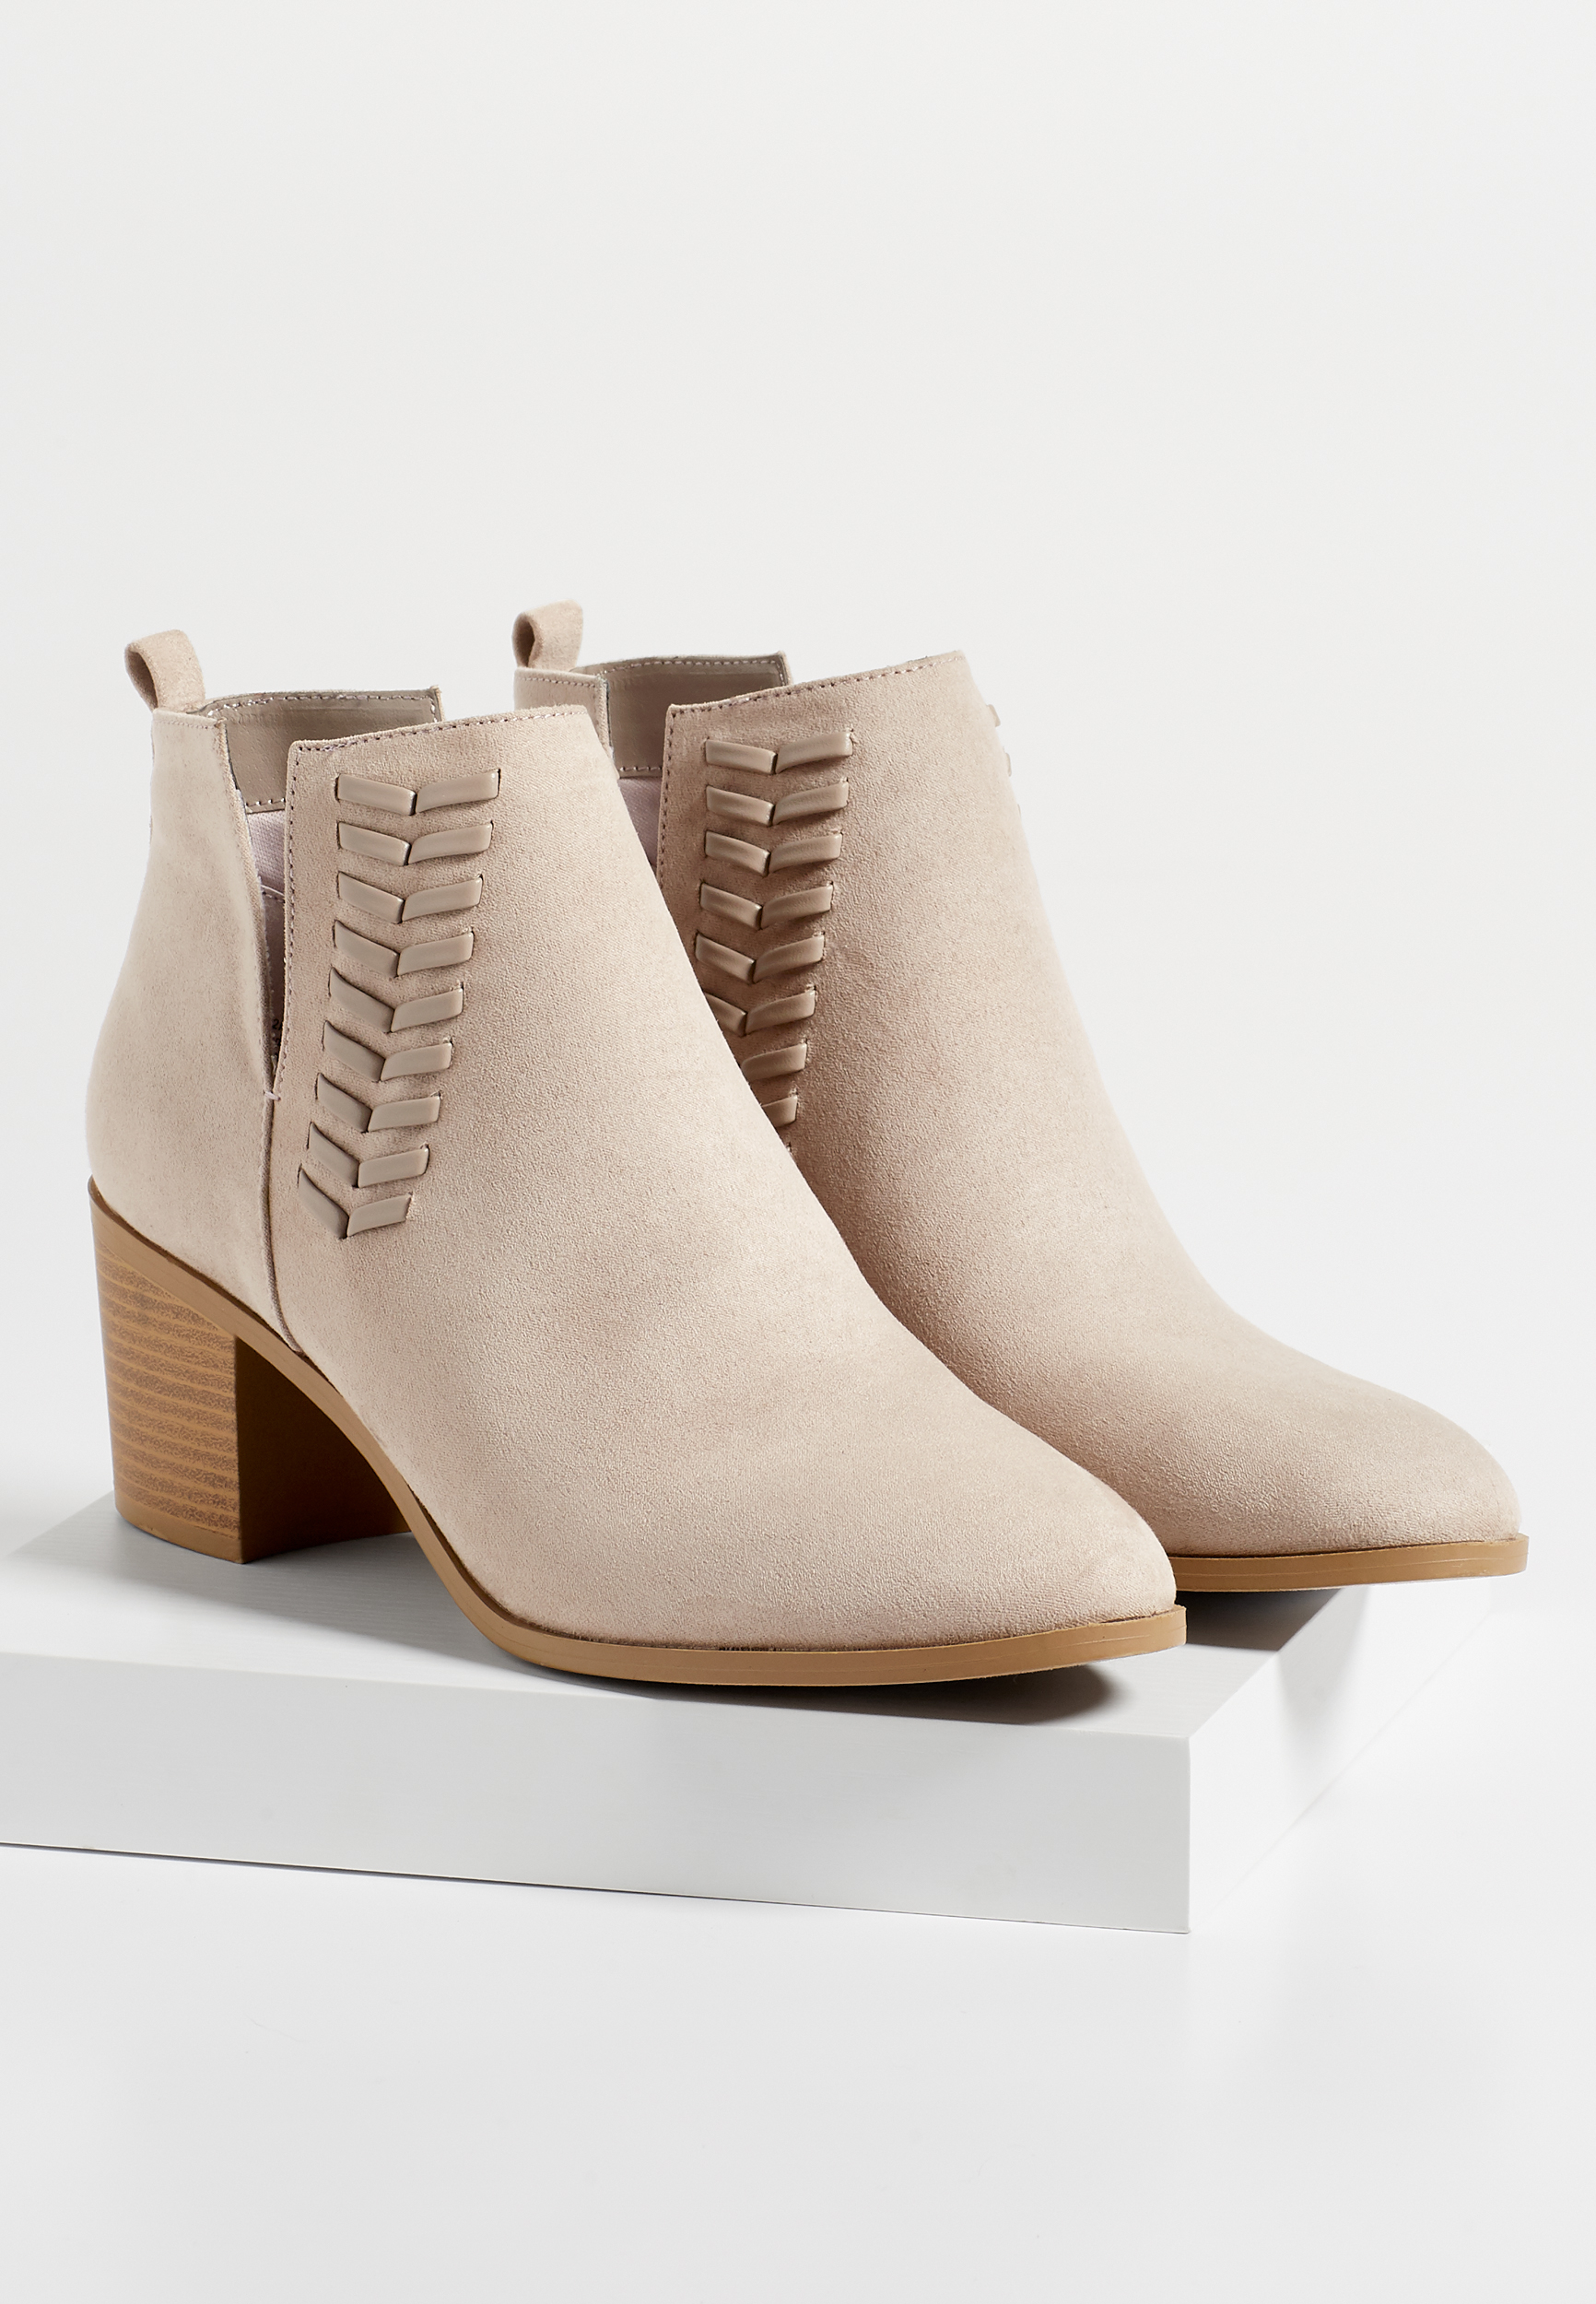 Tia whipstitch bootie | maurices